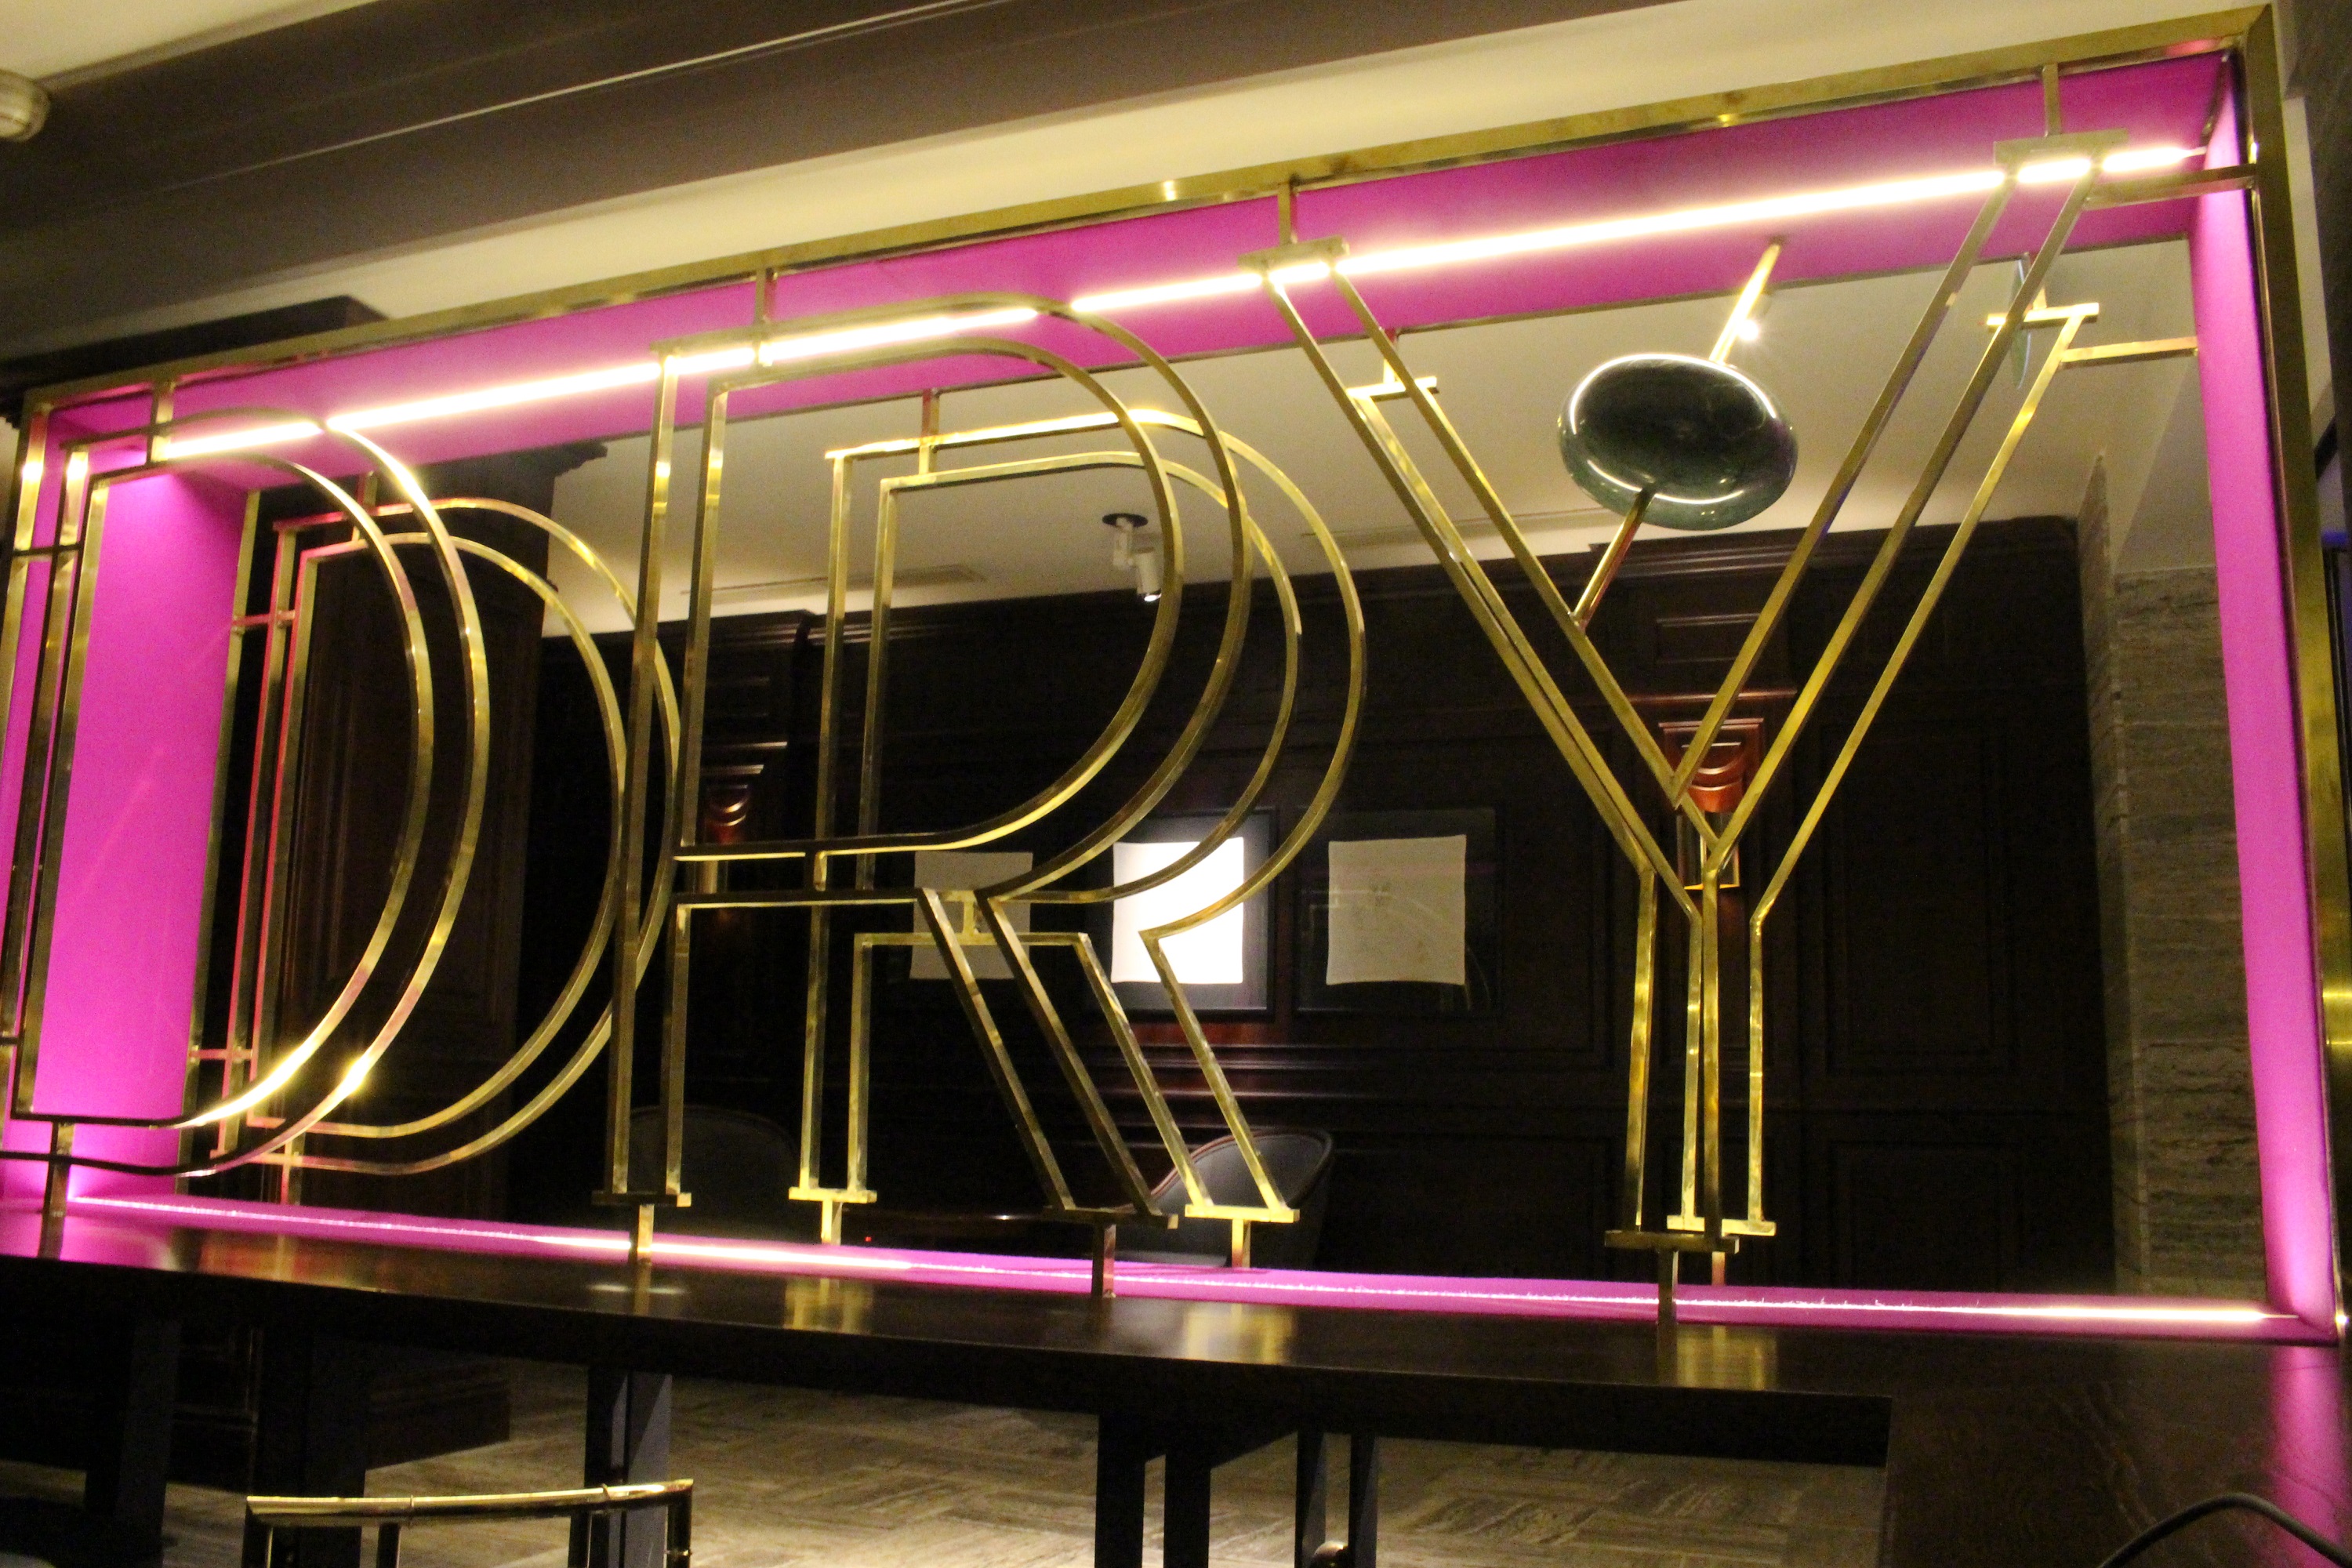 Image of the Dry Martini cocktail bar recently opened in London's Meliá White House Hotel (by ACN)